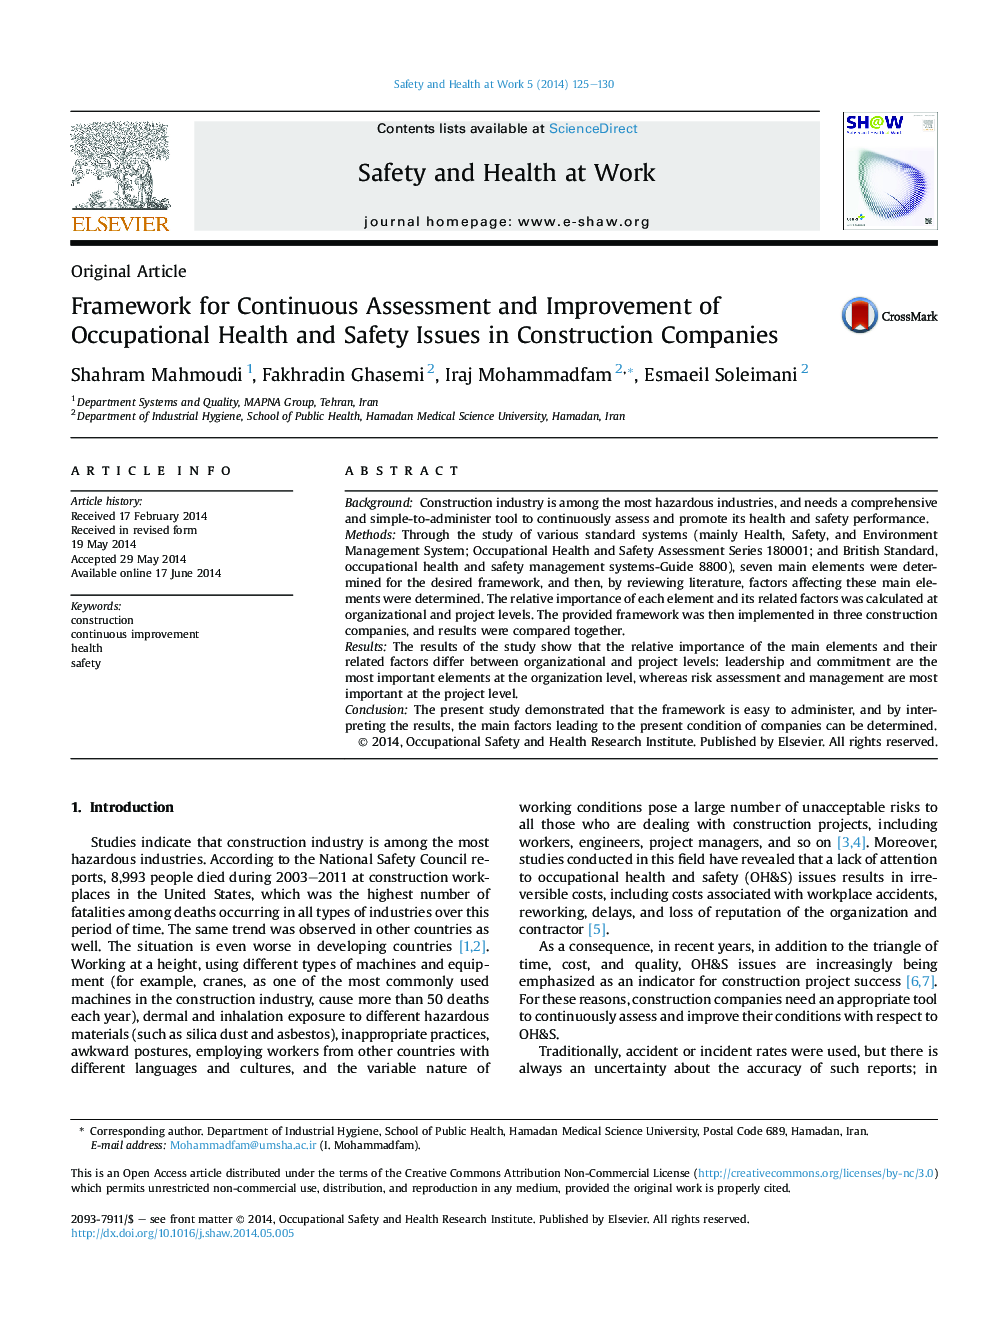 Framework for Continuous Assessment and Improvement of Occupational Health and Safety Issues in Construction Companies 